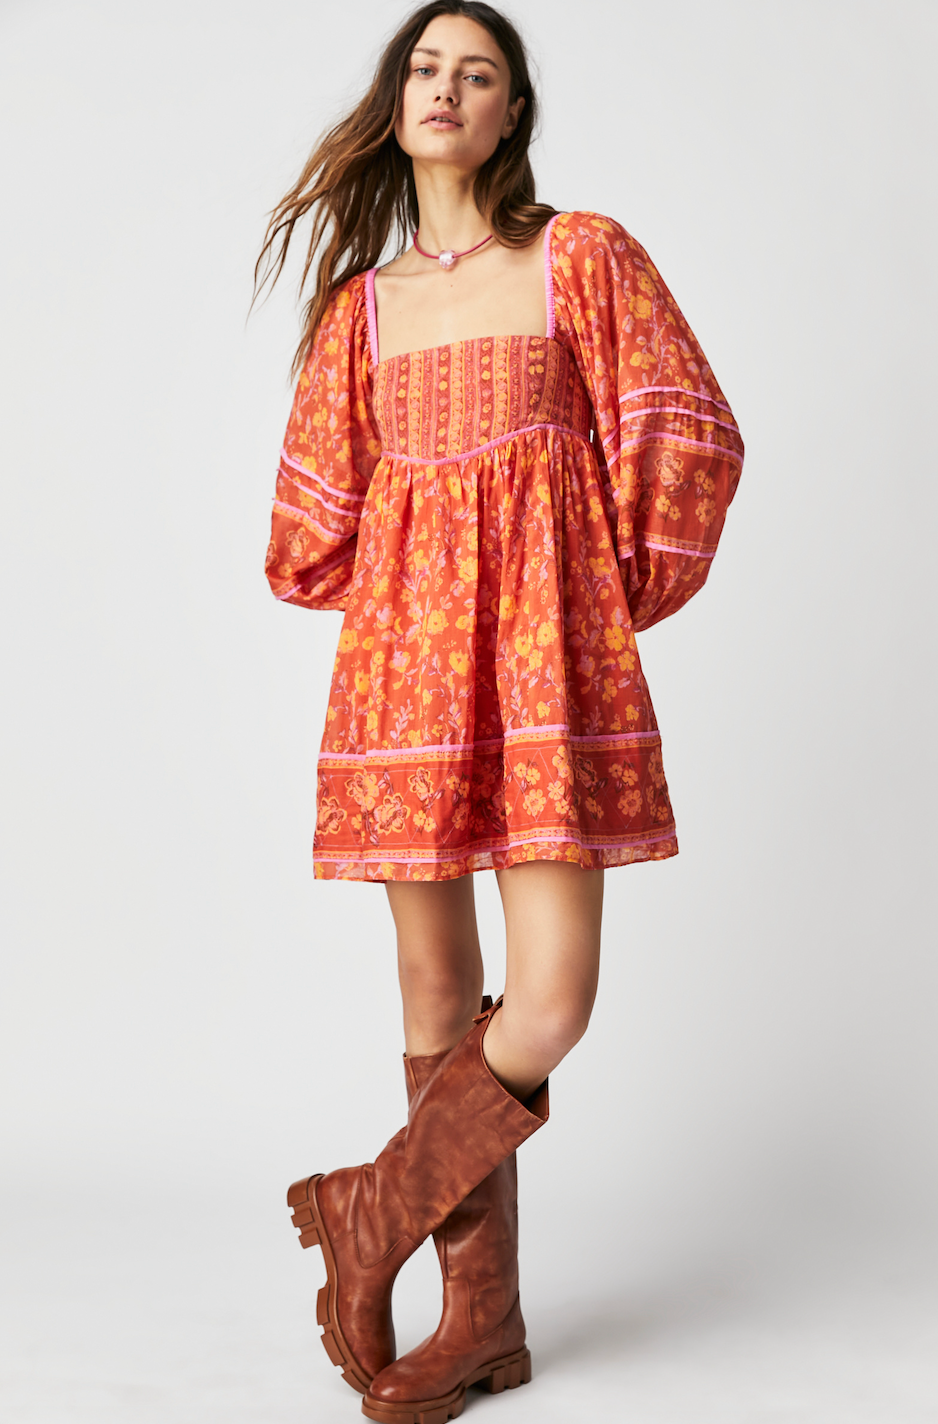 FREE PEOPLE ENDLESS AFTERNOON MINI DRESS IN CHILI COMBO